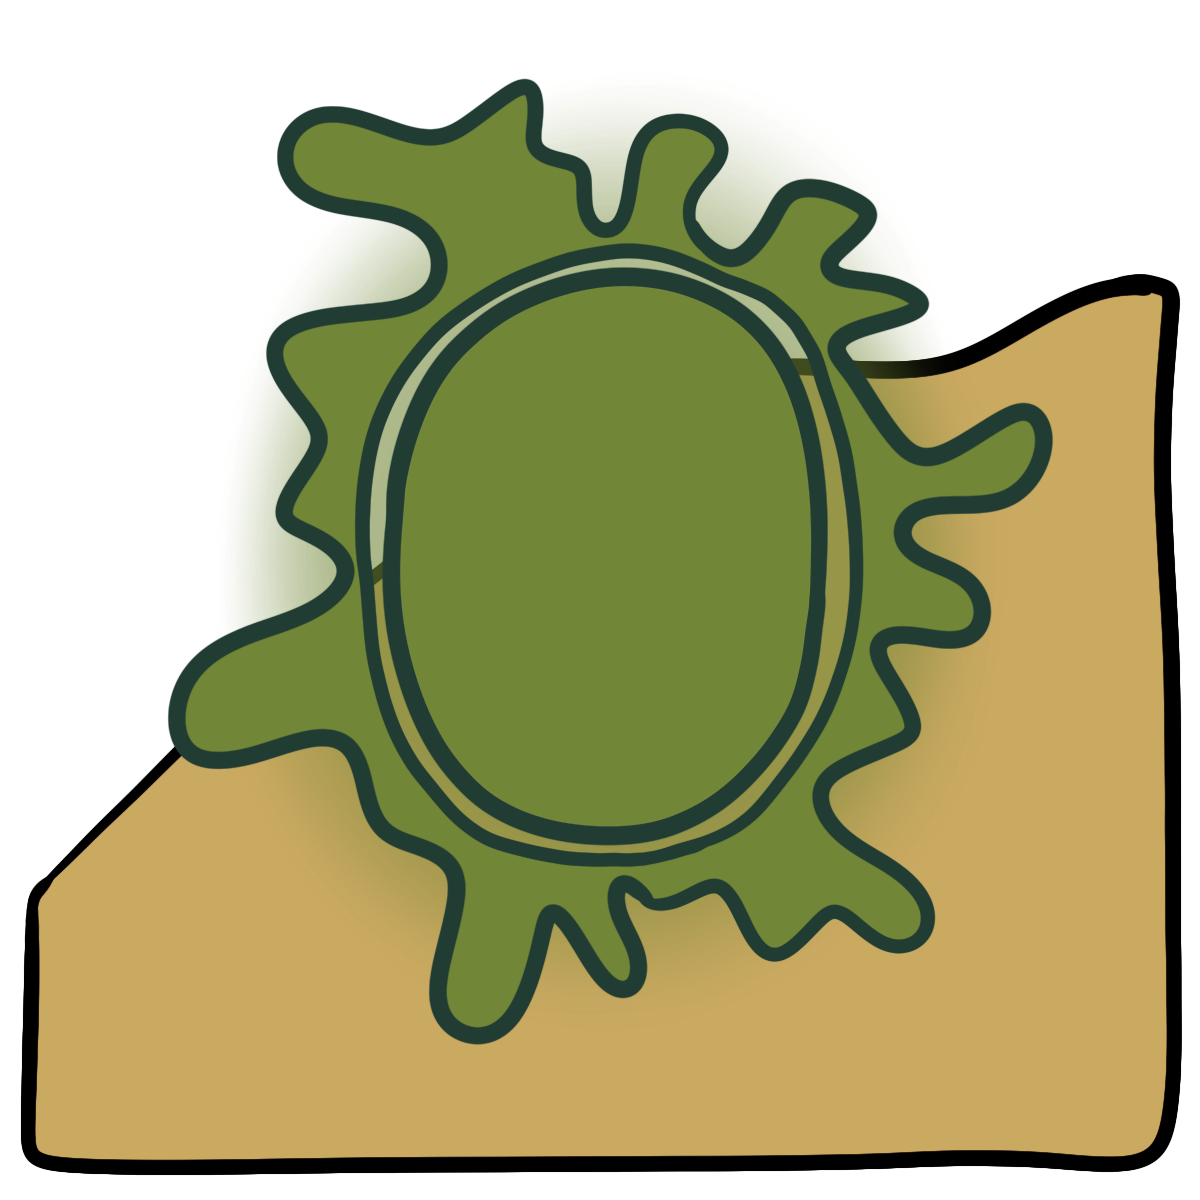 A yellowy green oval with a splatting blob shape encircling it. Curved yellow skin fills the bottom half of the background.